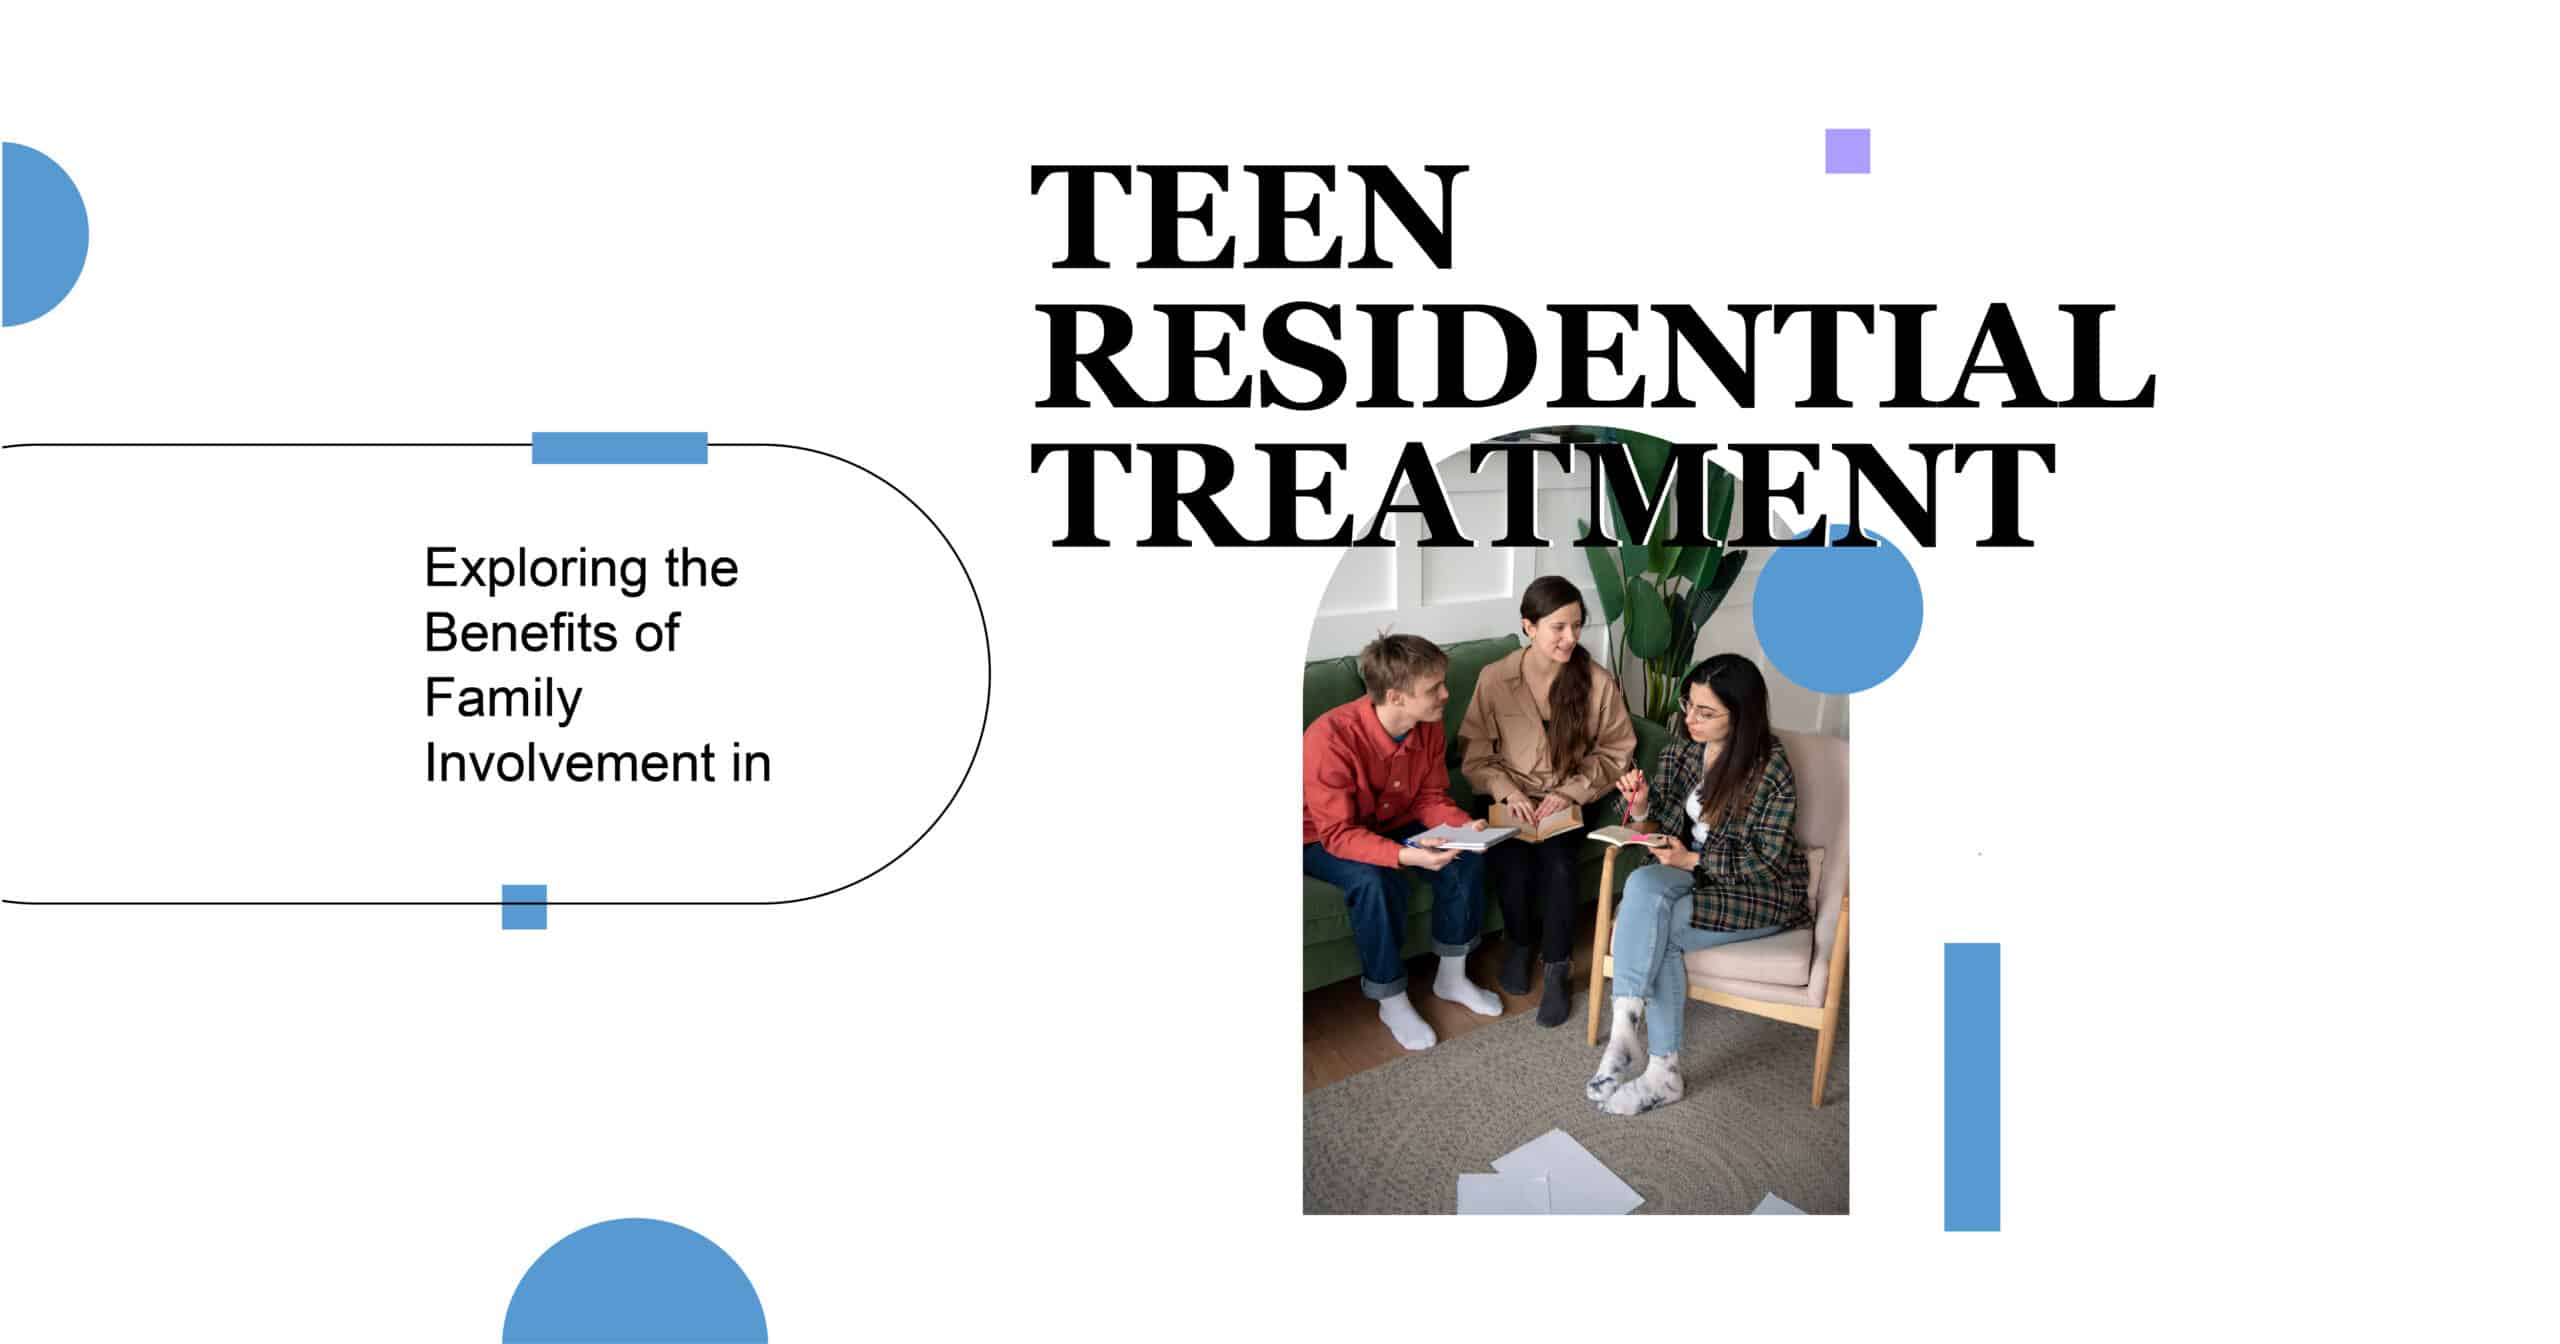 Family Involvement in Teen Residential Treatment